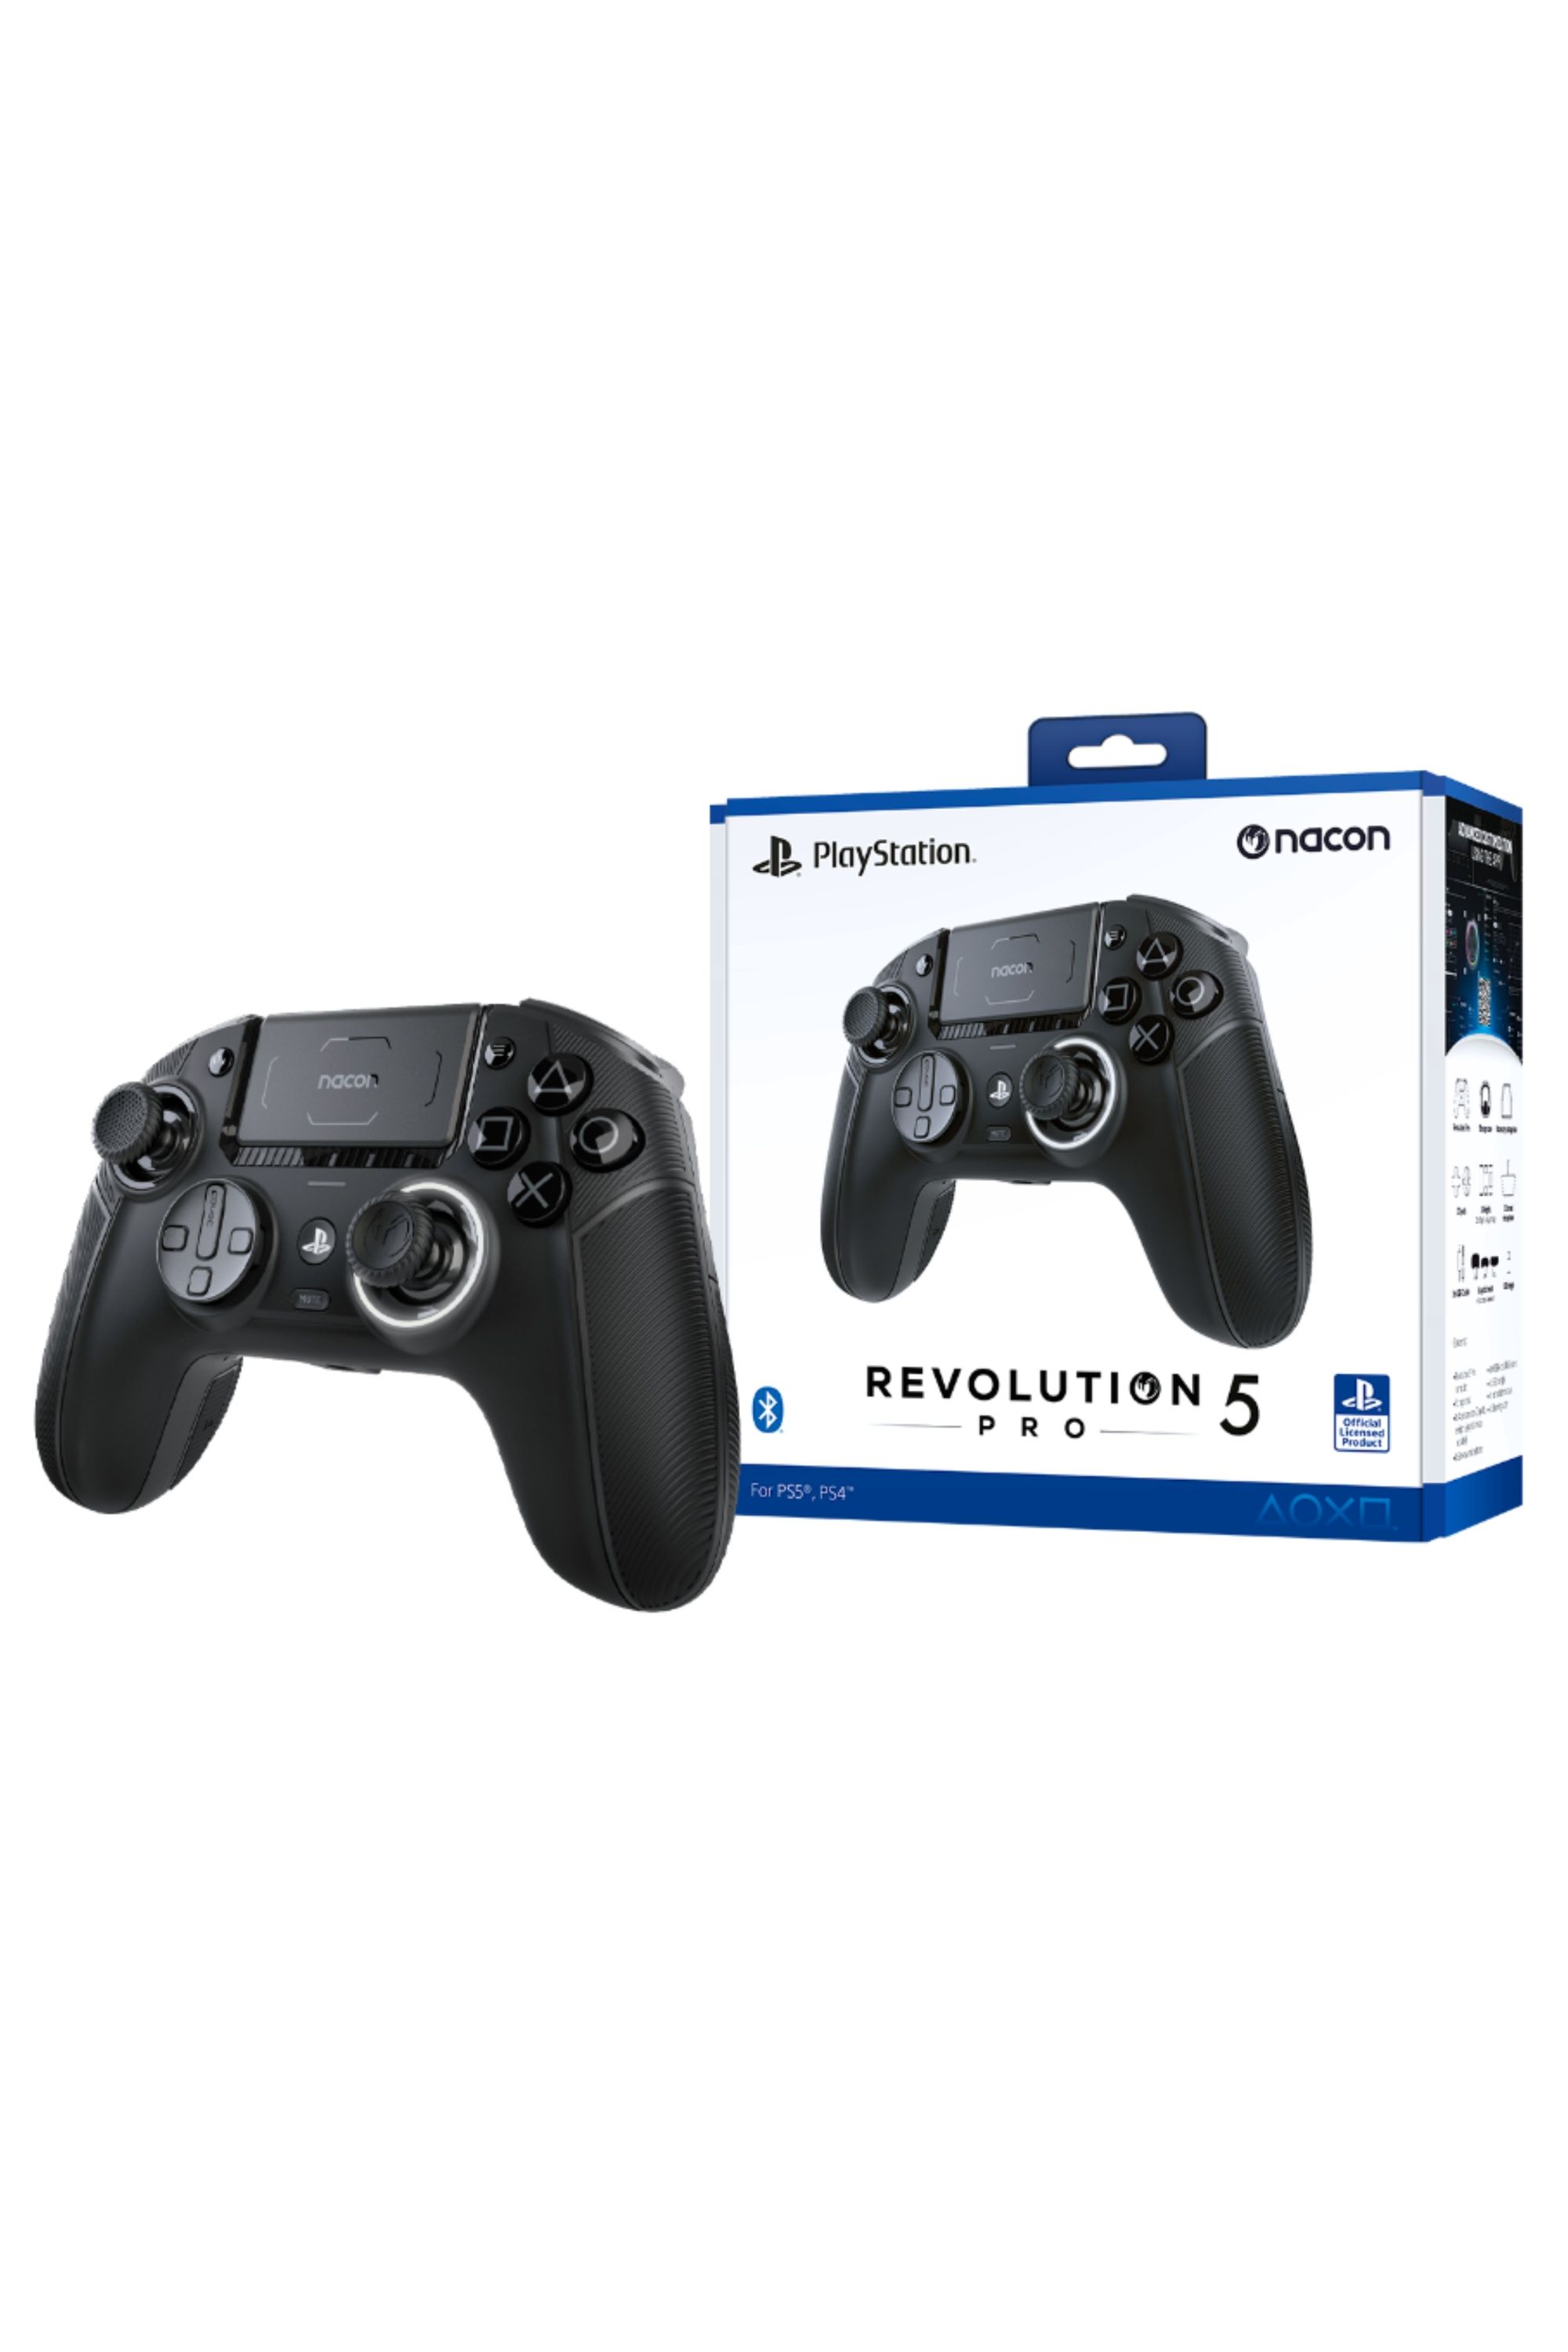 Nacon's Revolution 5 Pro for Playstation: Is it worth it?